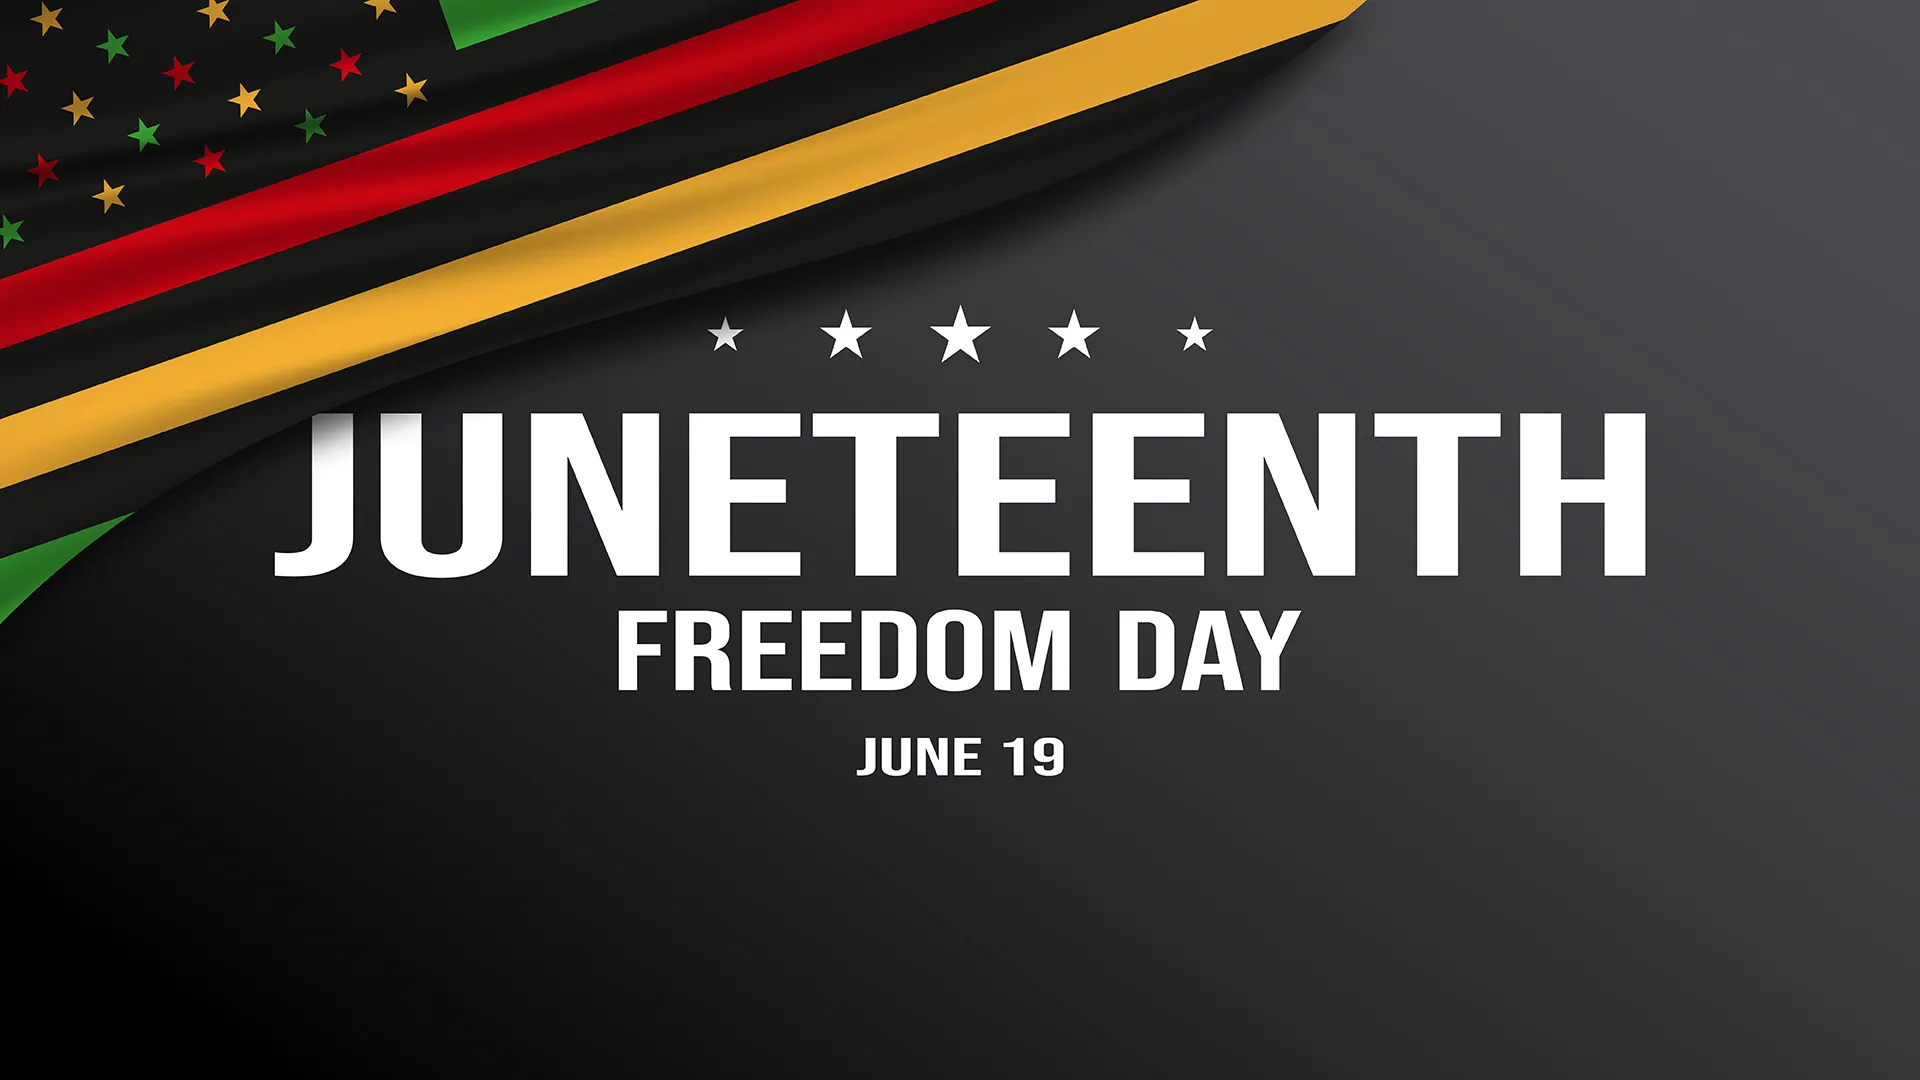 Juneteenth Freedom Day graphic